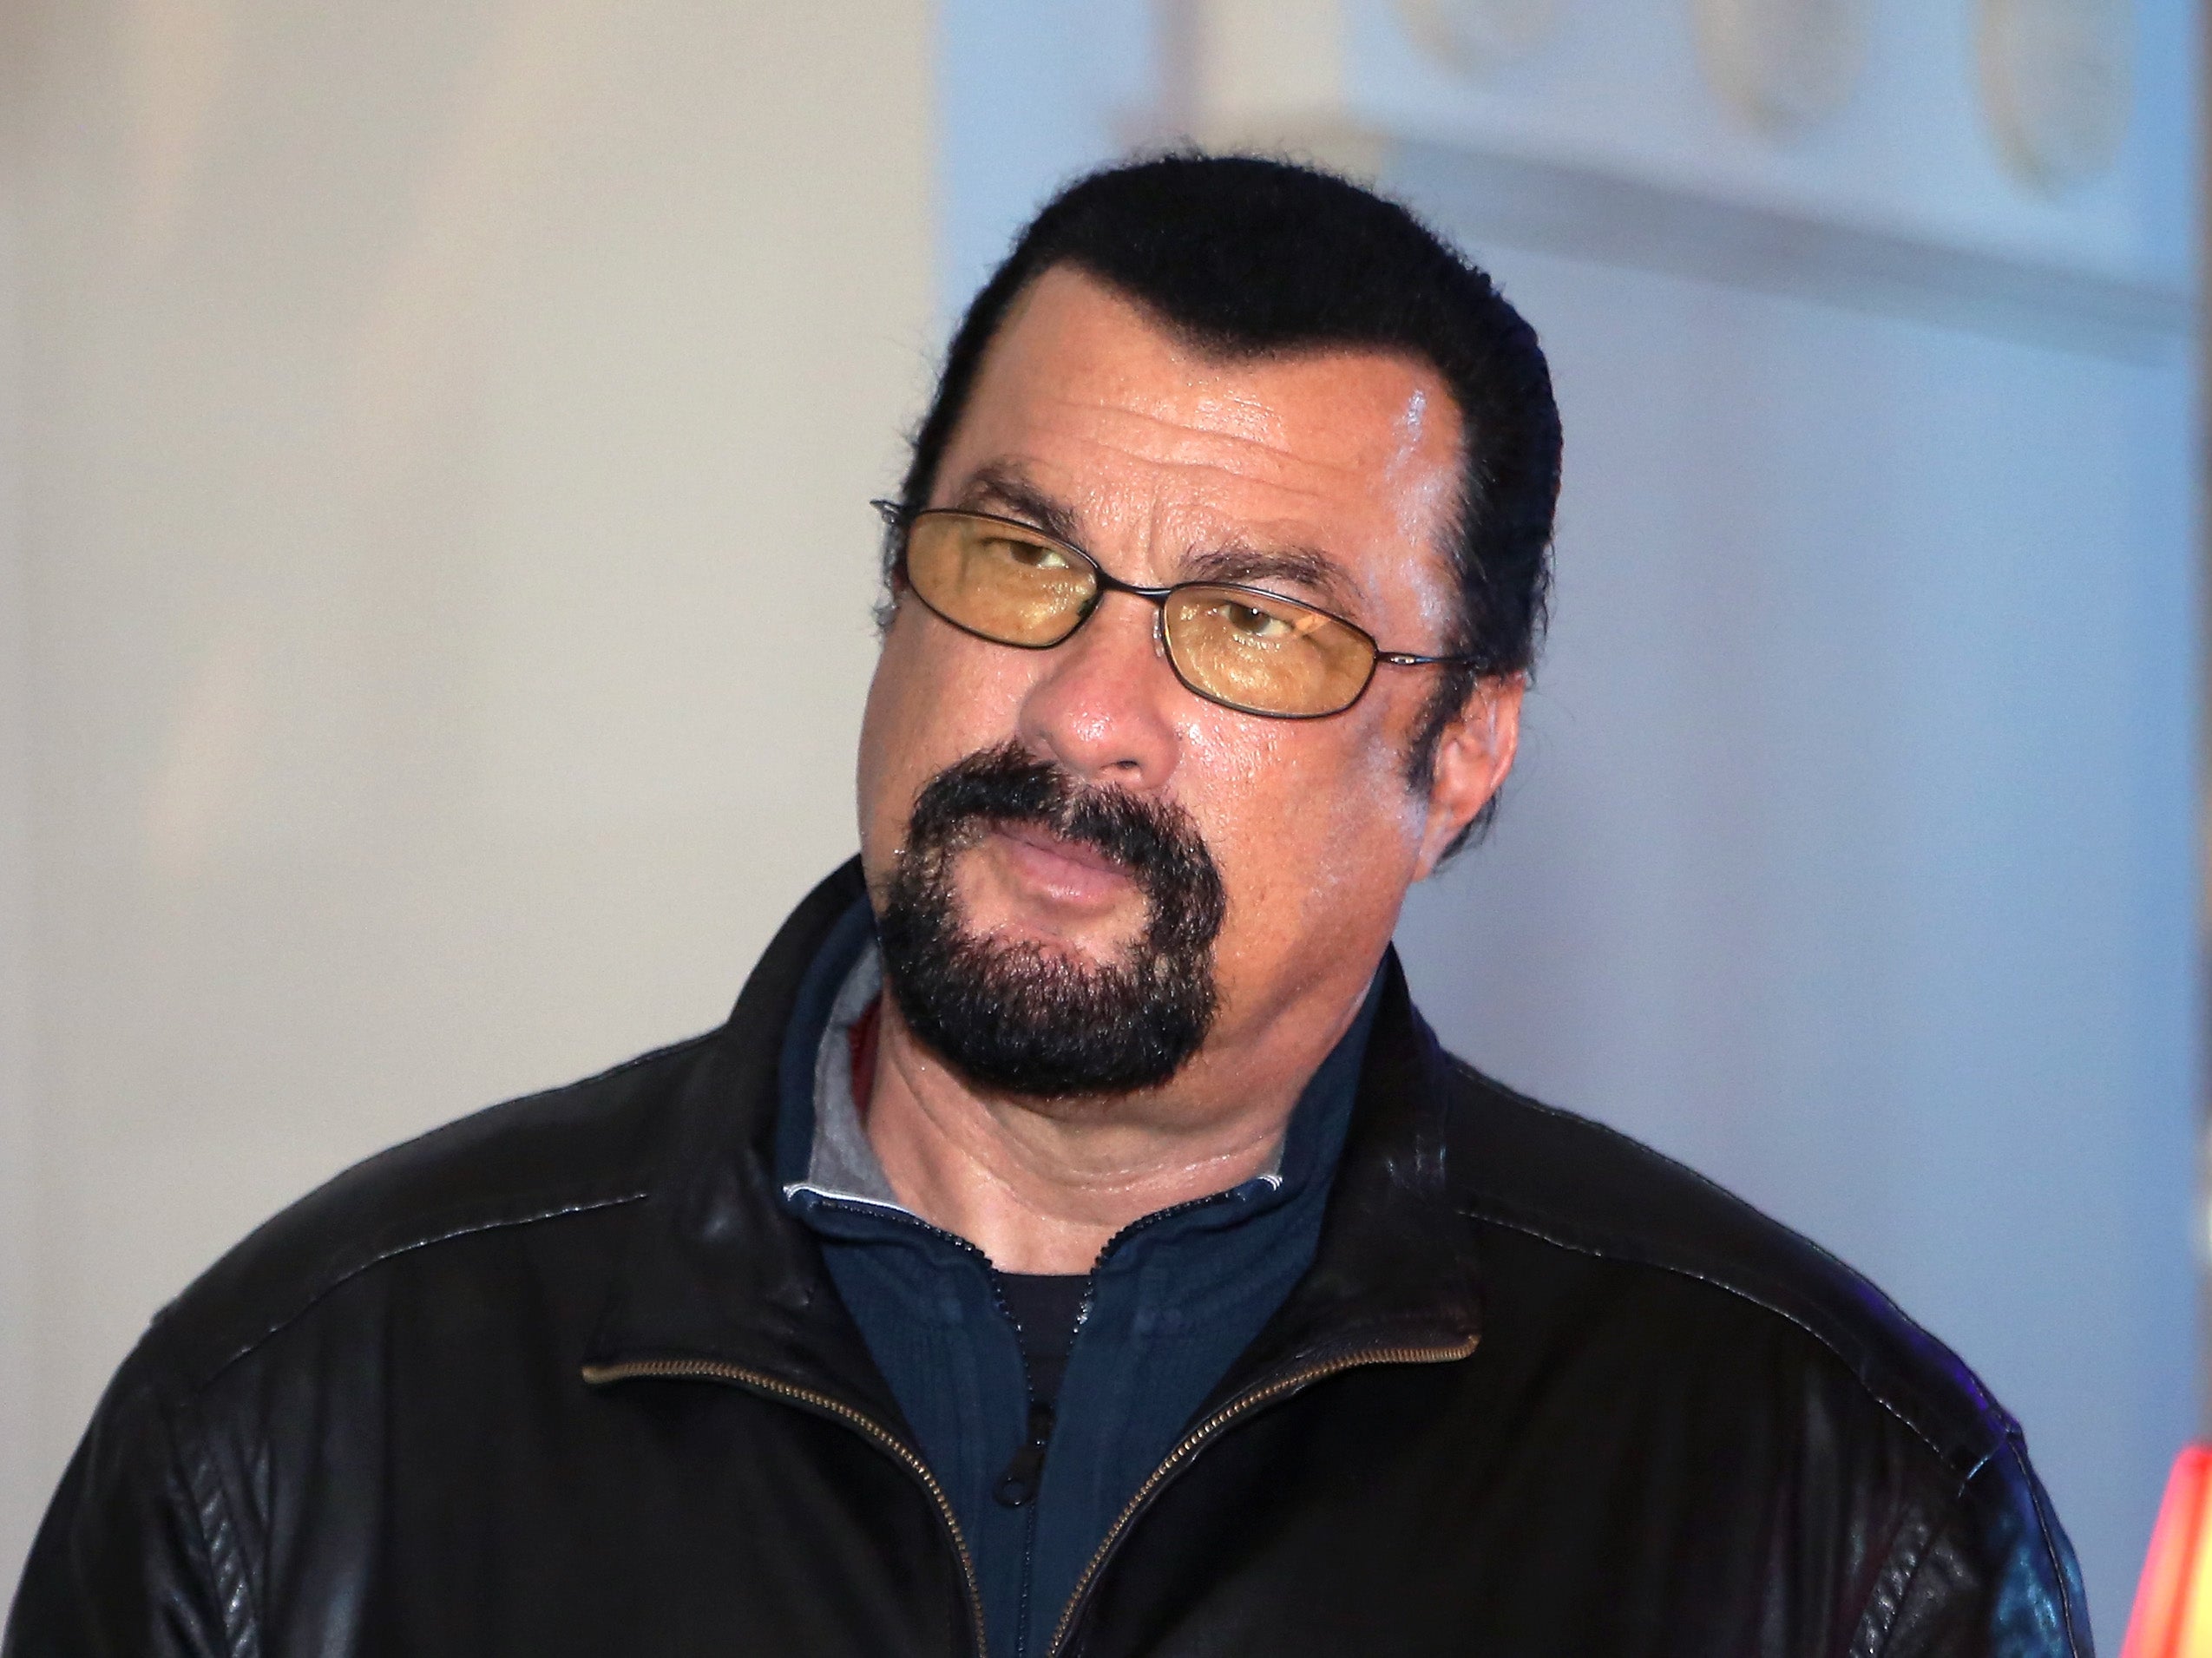 Steven Seagal praised Putin at his birthday party in Moscow